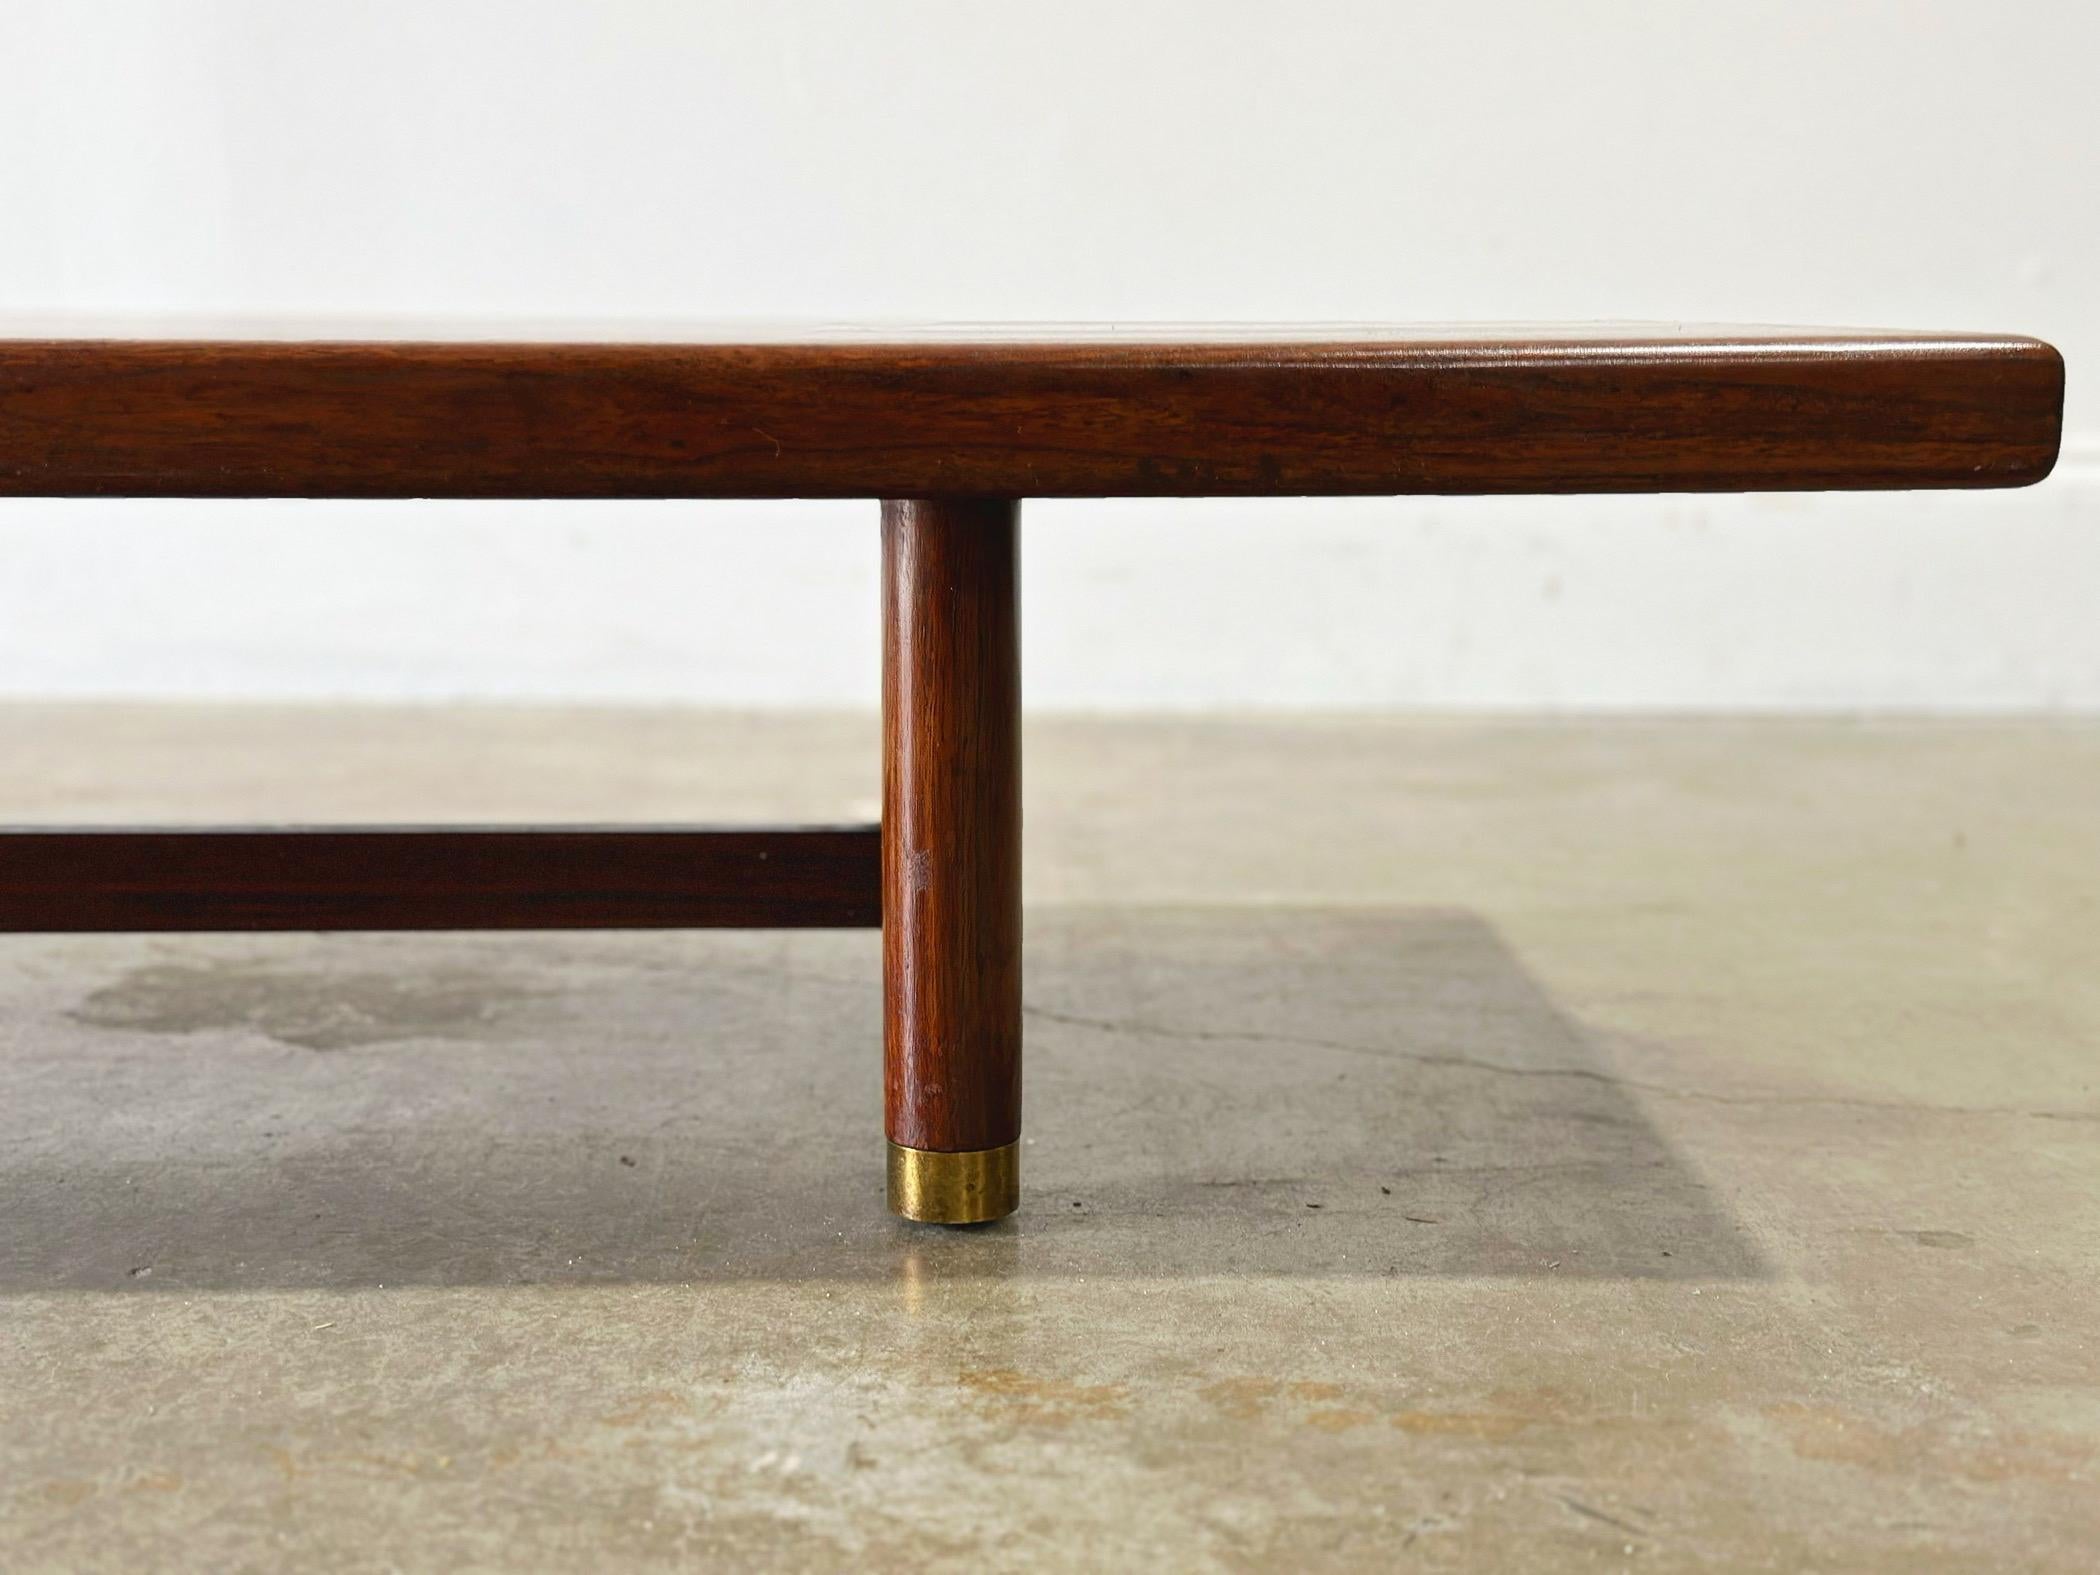 Long and low cocktail table or bench in walnut by Gordon's fine Furniture circa 1950s. Perfect for an entryway. Brass sabots. 
This table has been attended to and restored by our team - it is in excellent condition and is ready for use.